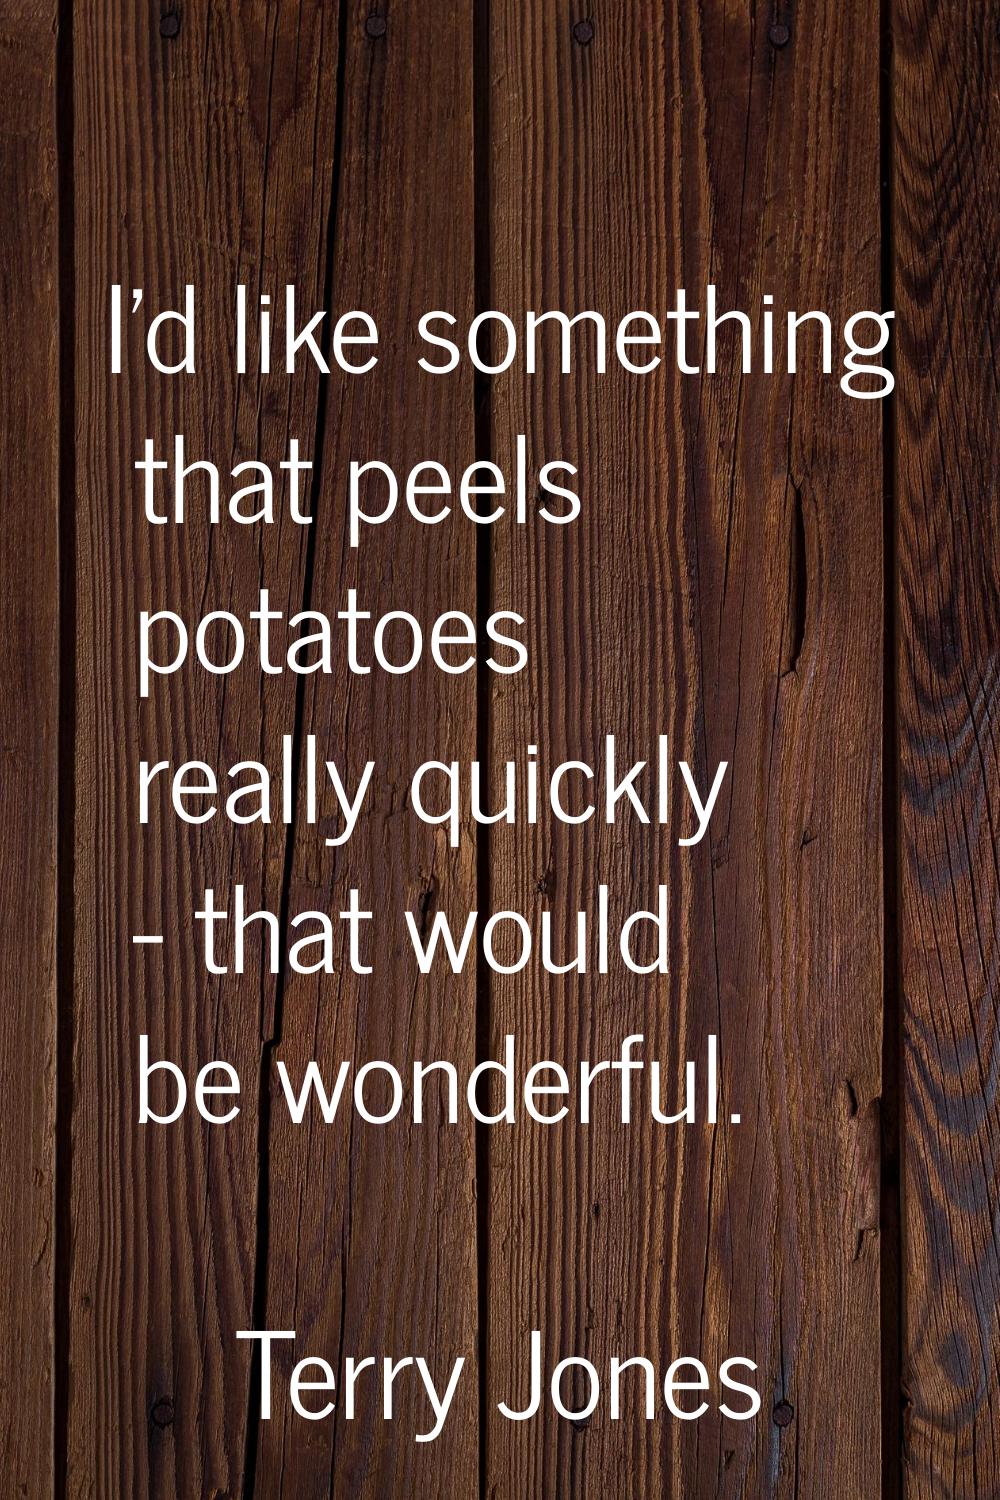 I'd like something that peels potatoes really quickly - that would be wonderful.